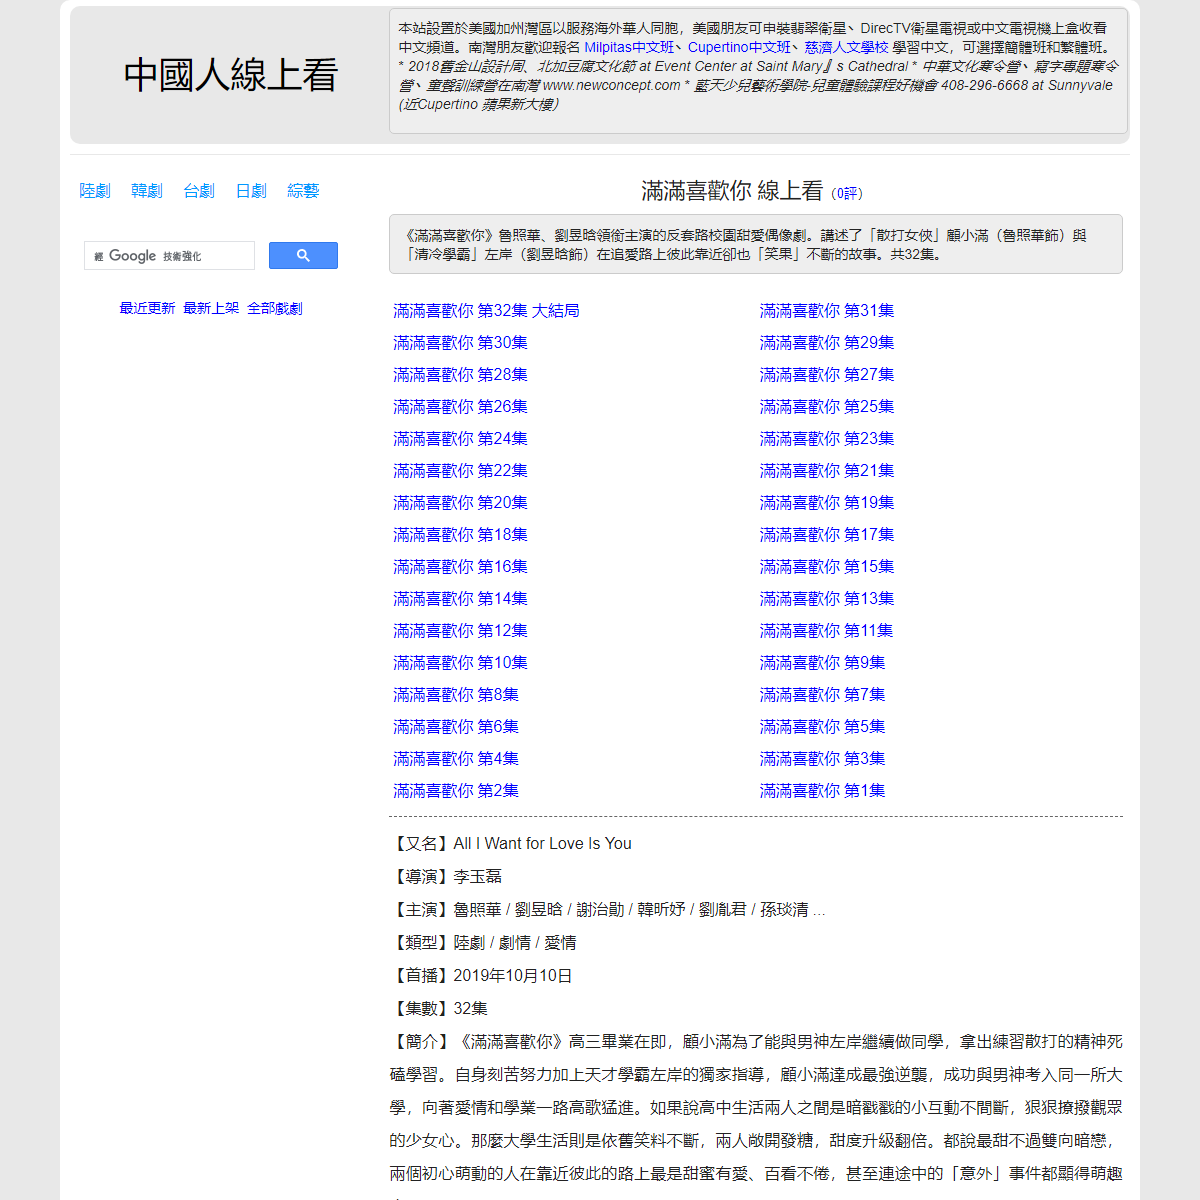 A complete backup of https://chinaq.tv/cn191010/